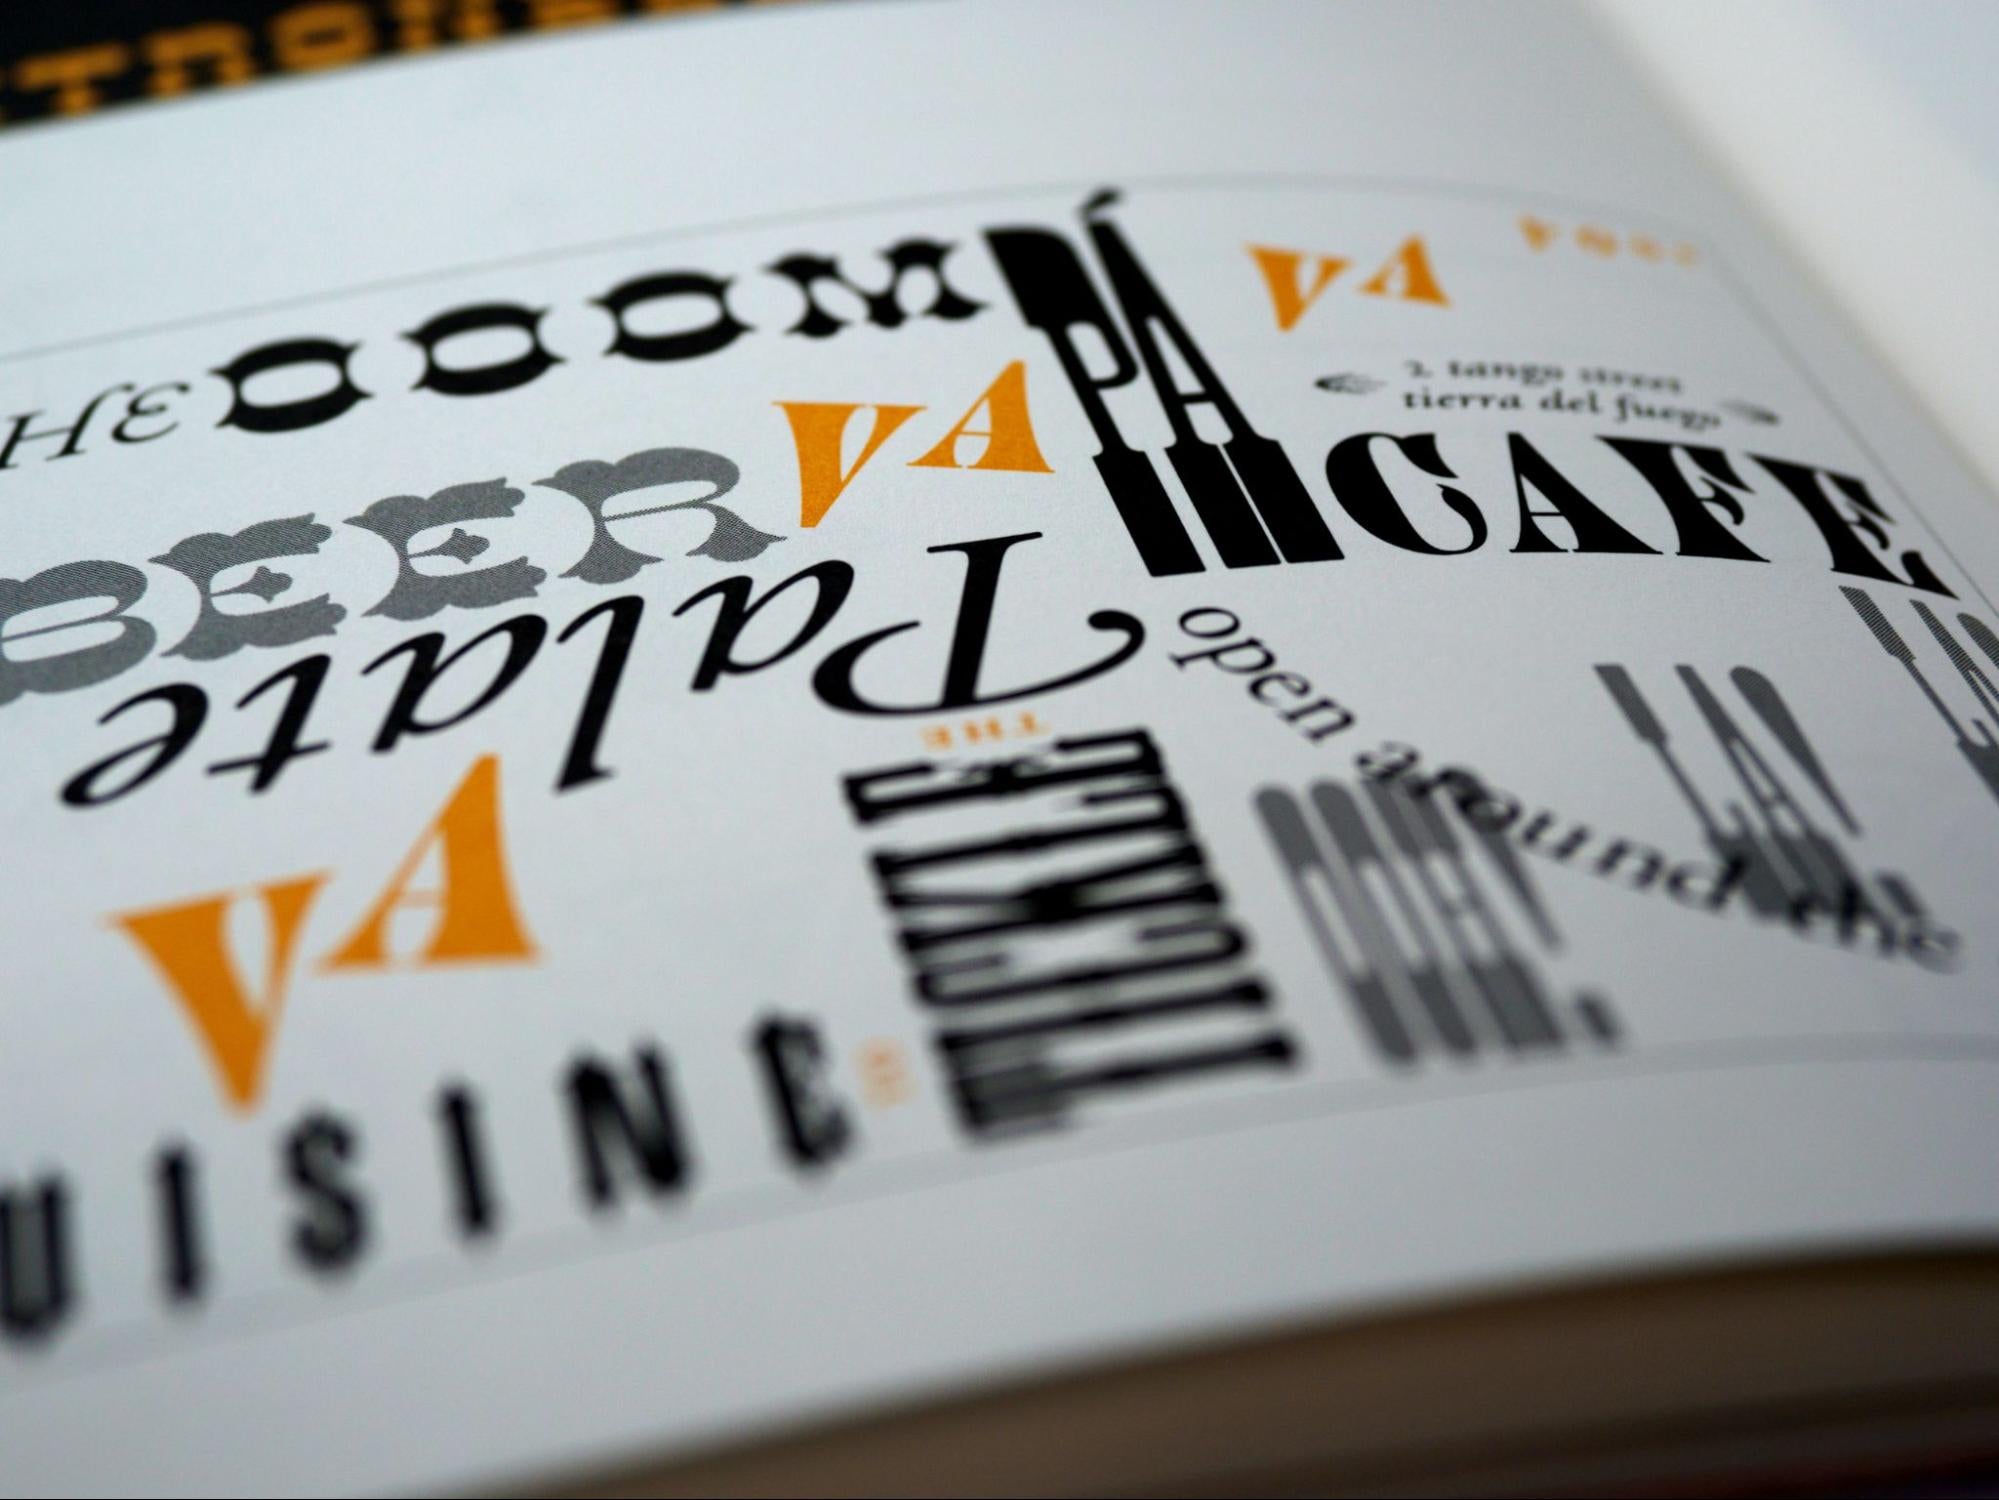 Fonts as brand identity